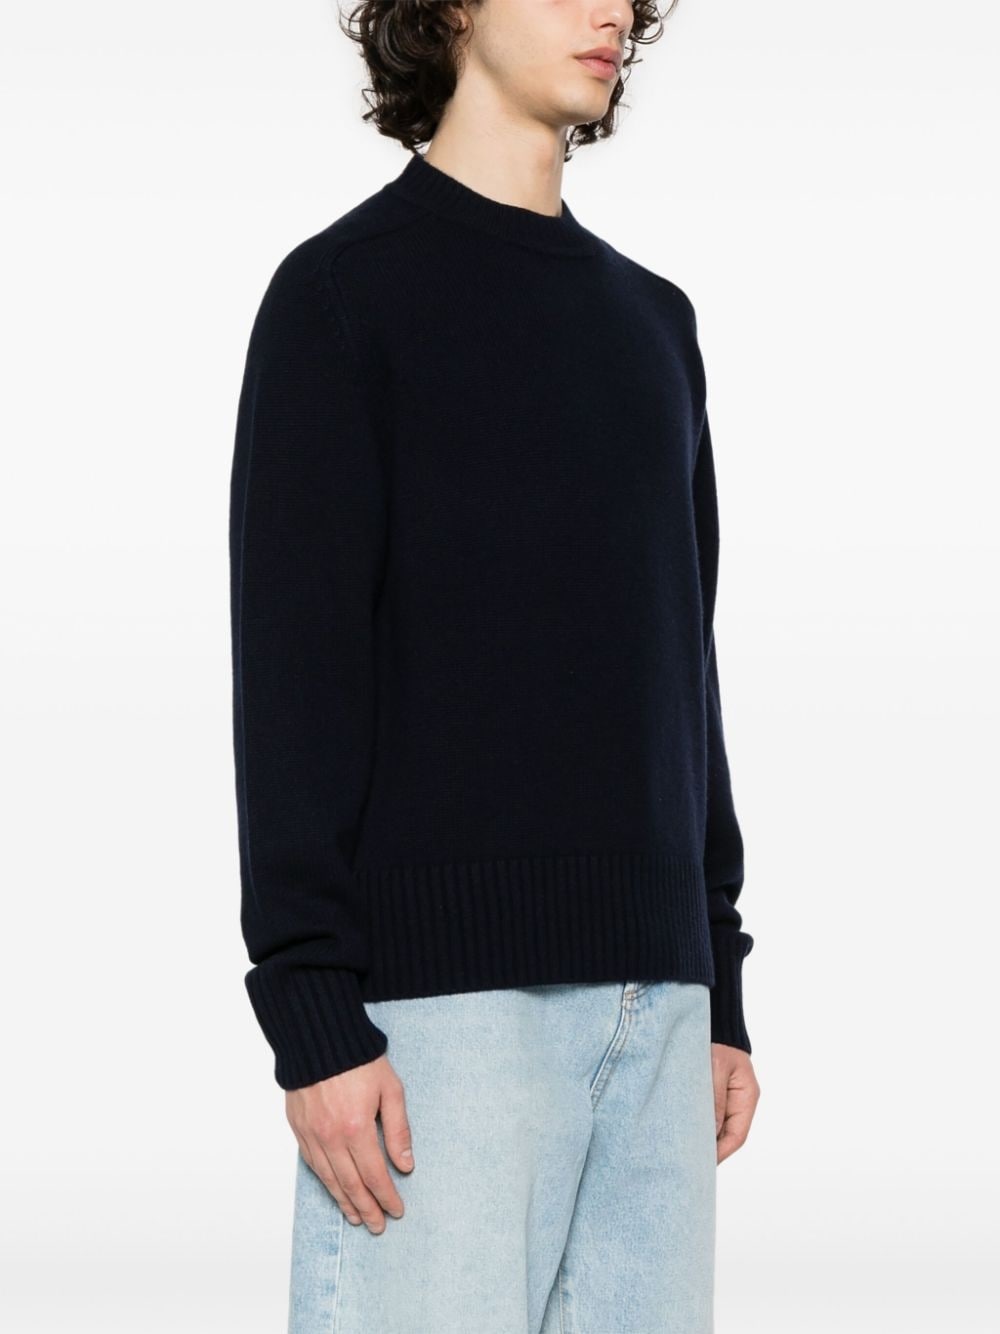 Bourgeois cashmere jumper - 3